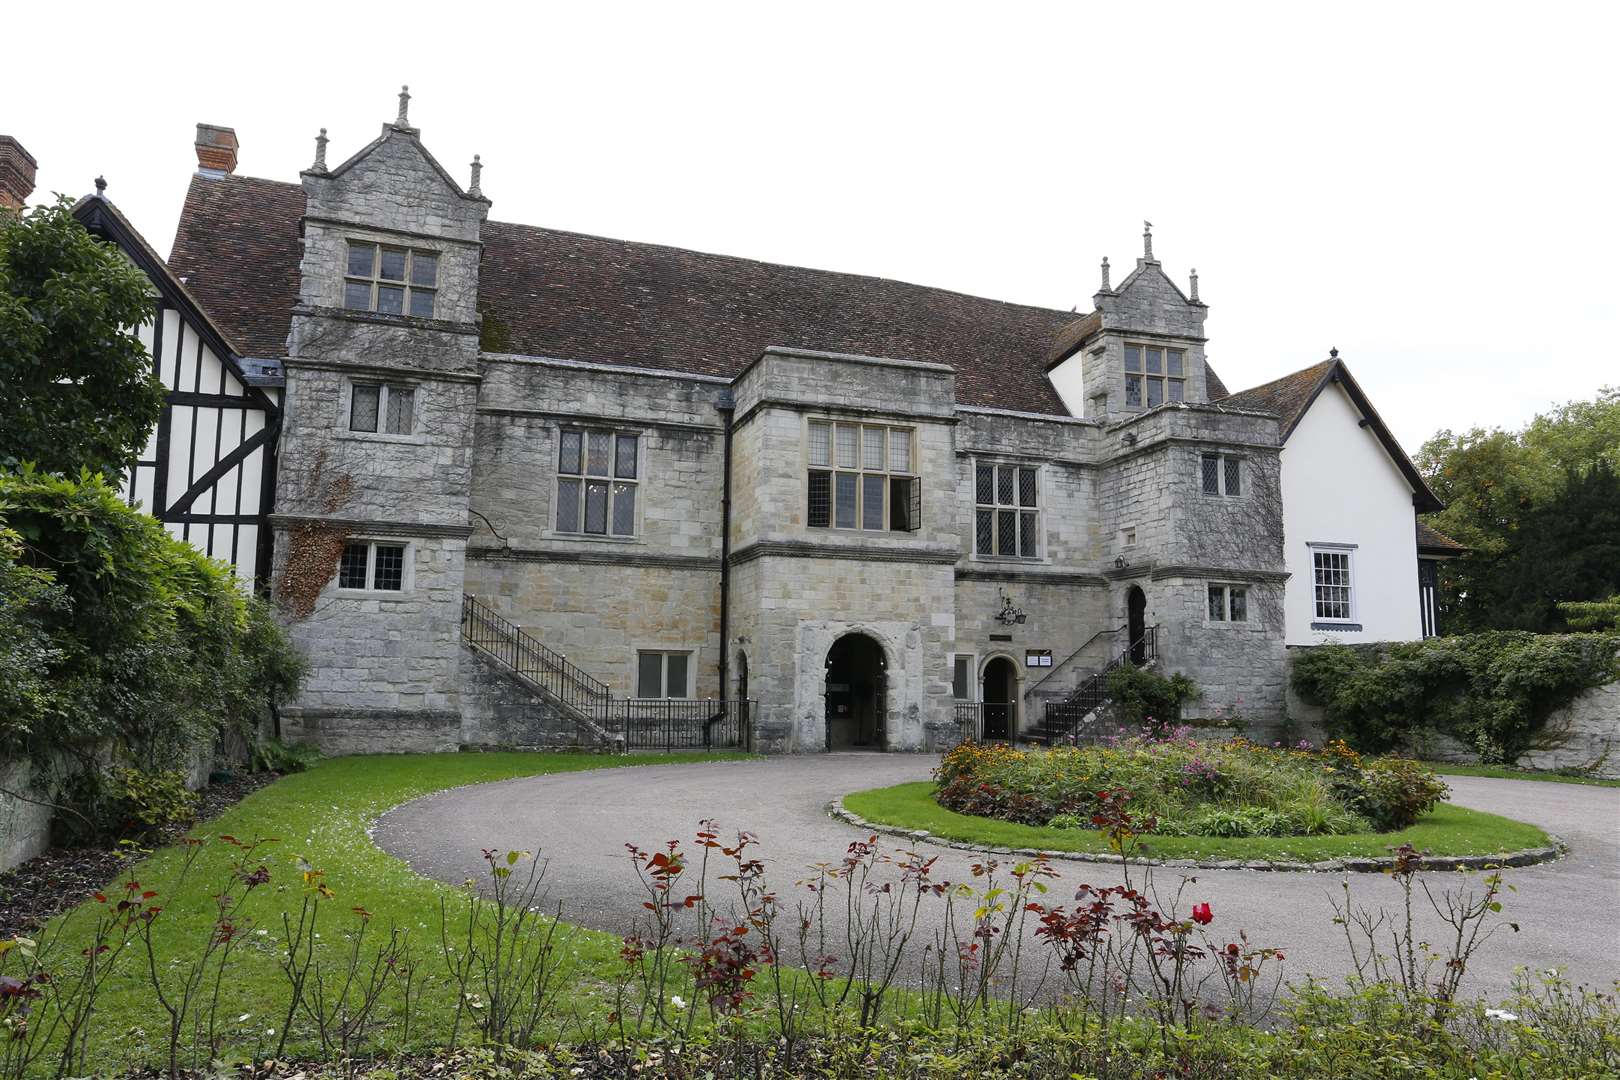 The inquest was held at Archbishop’s Palace in Maidstone